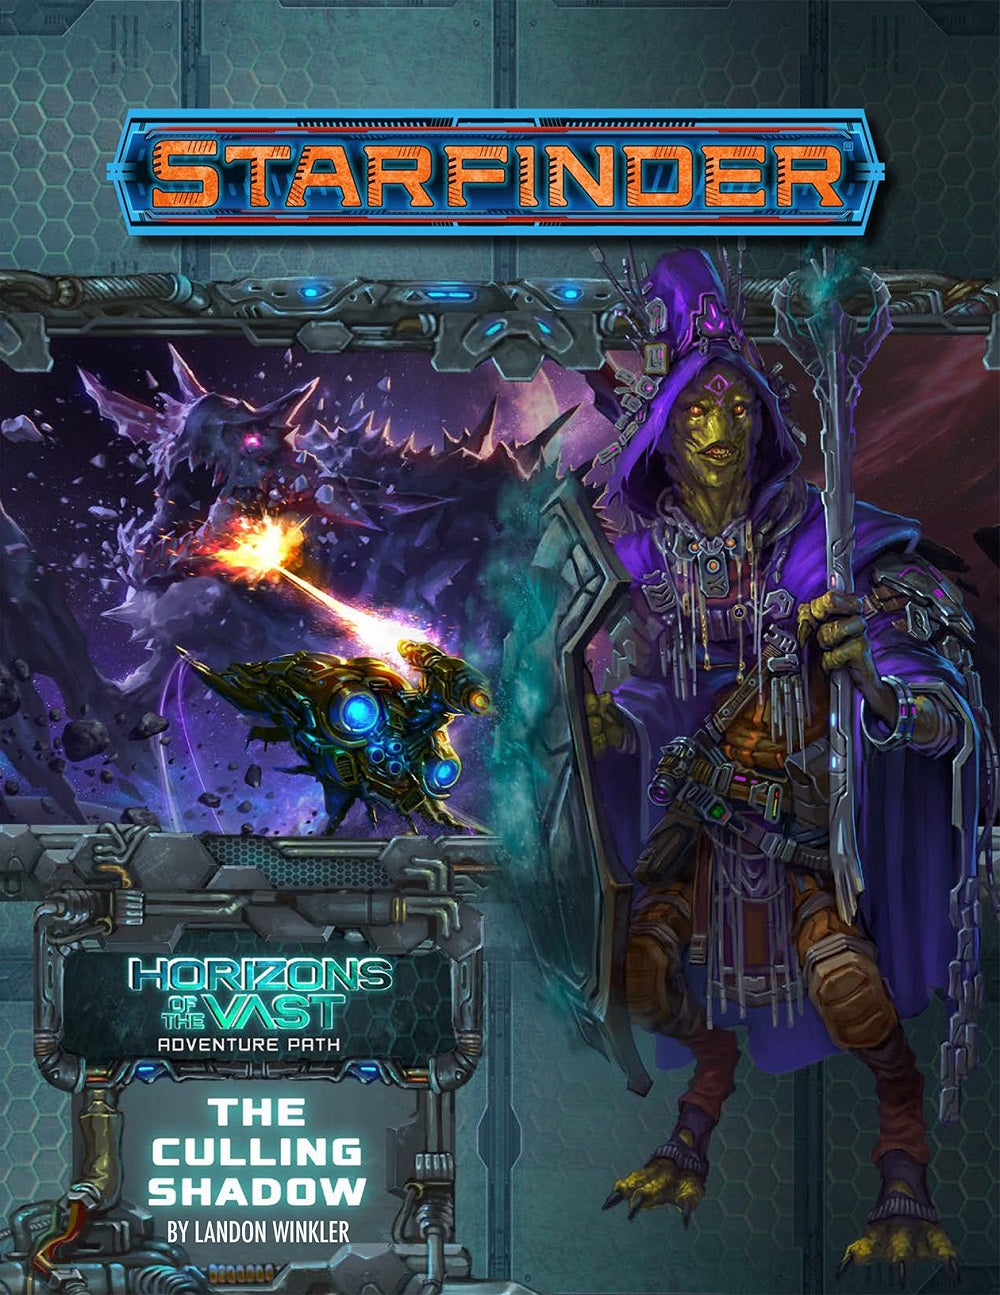 STARFINDER 45 HORIZONS OF THE VAST 6: THE CULLING SHADOW | BD Cosmos